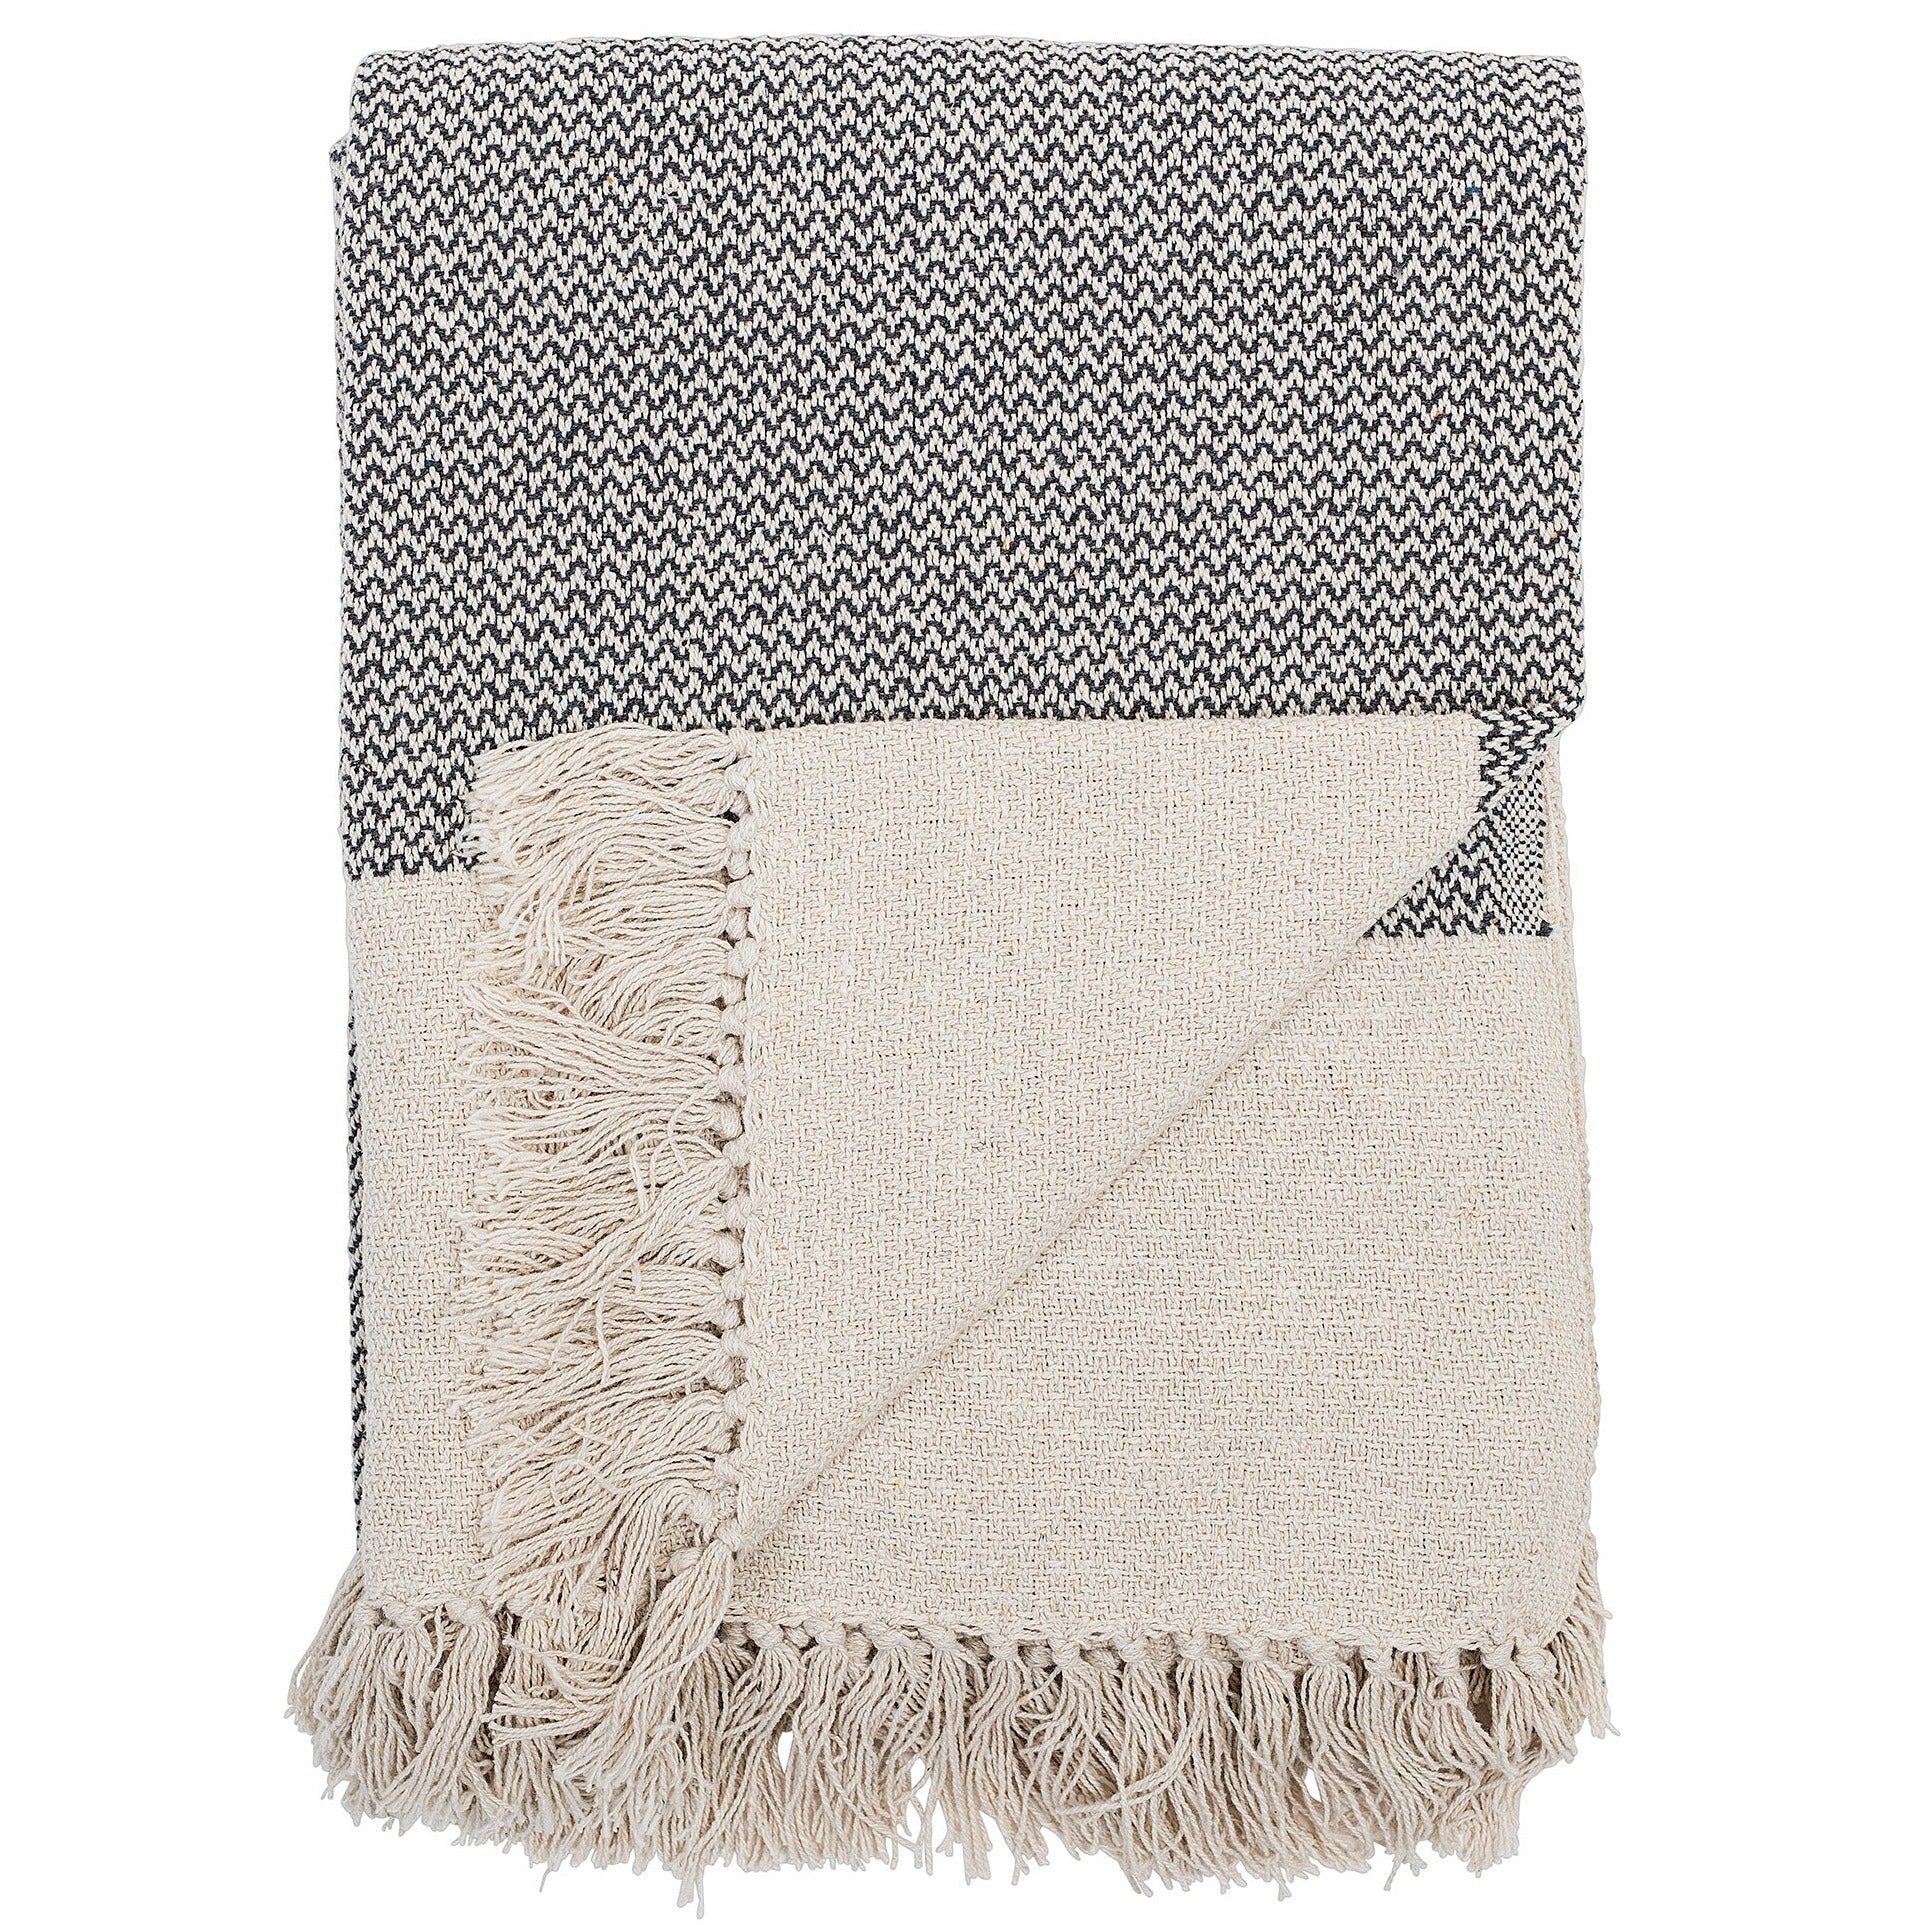 Sefanit Throw, Grey, Recycled Cotton